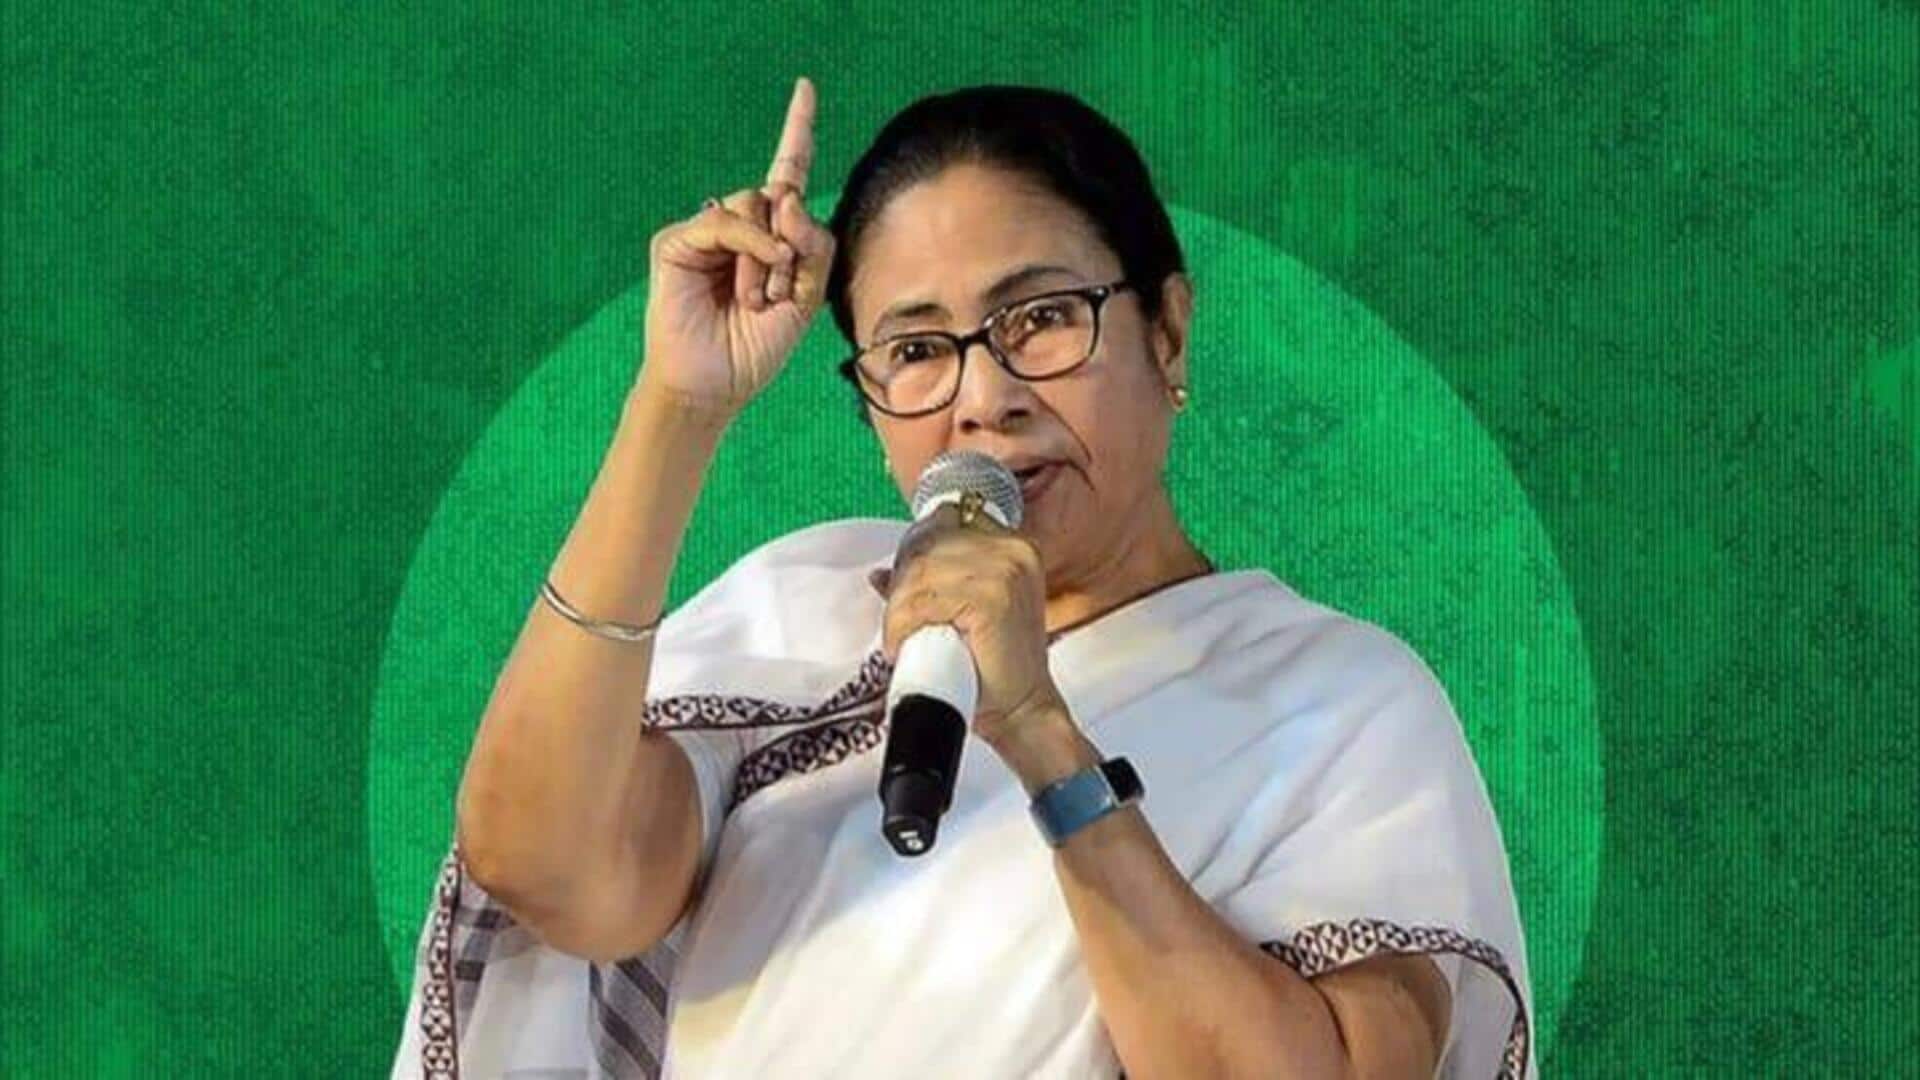 If BJP wins polls, you'll collect dung for cooking: Mamata